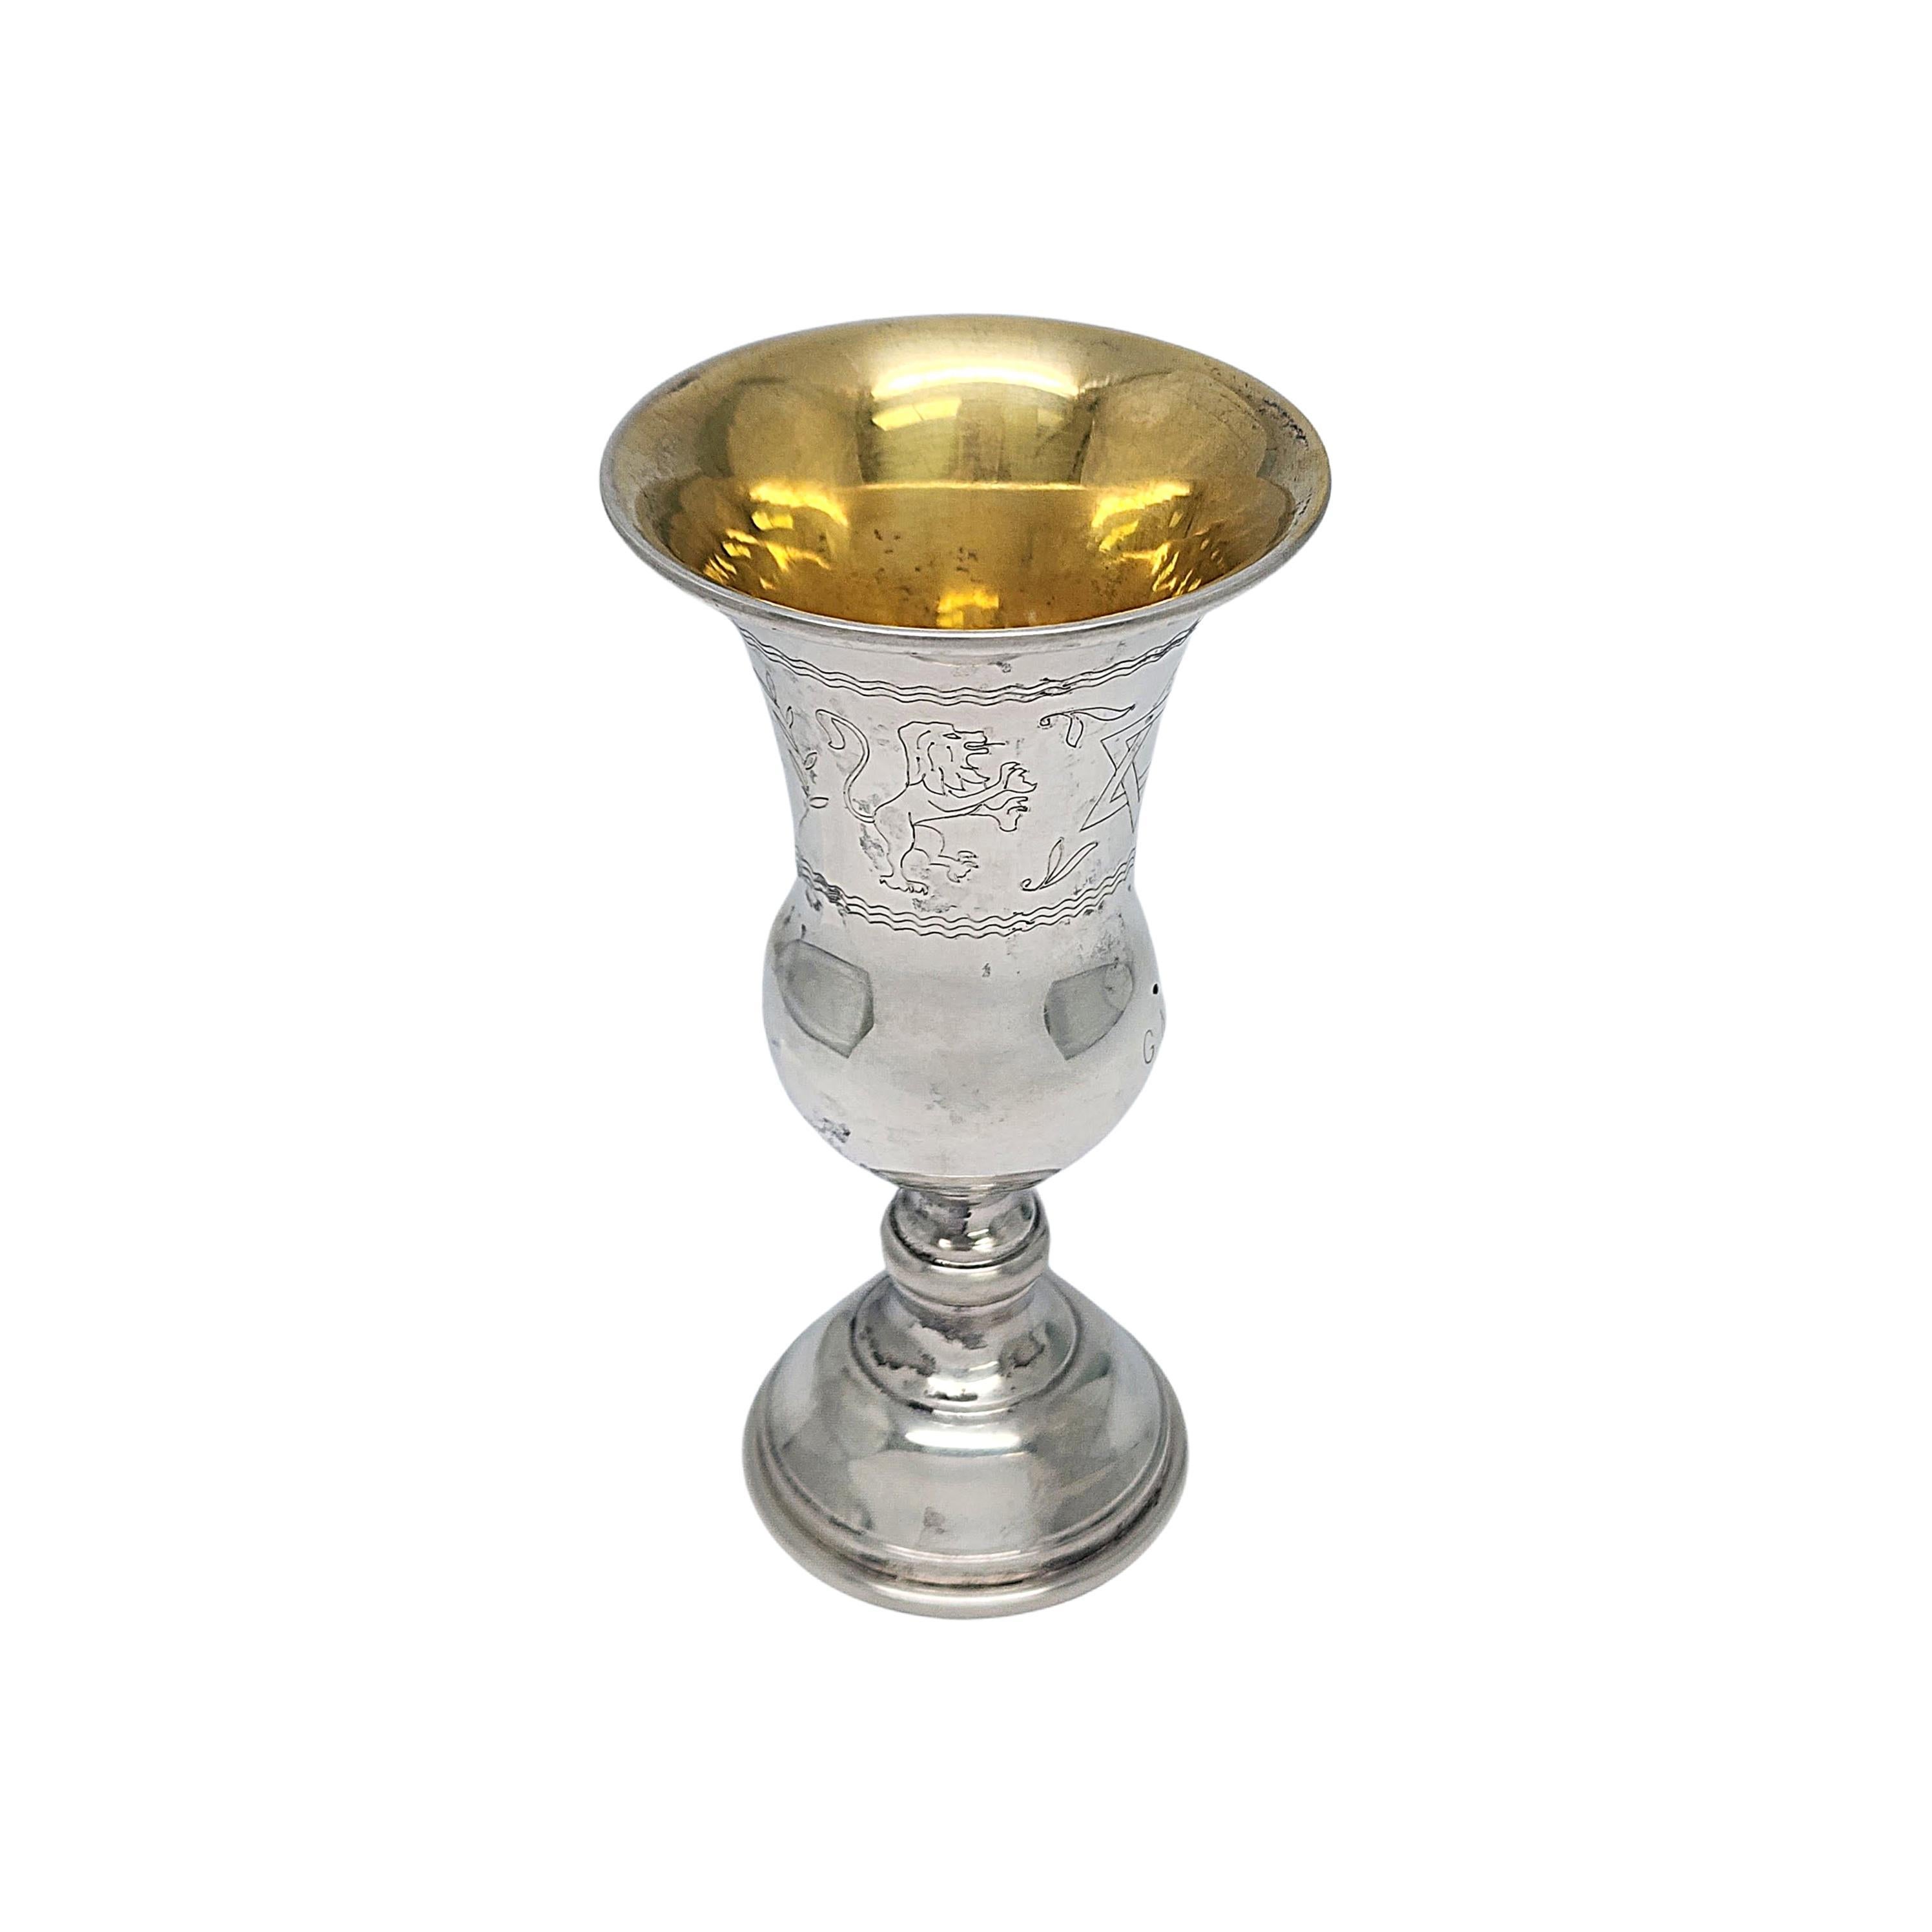 Women's or Men's Web Sterling Silver Gold Wash Interior Kiddush Cup with Monogram #16813 For Sale